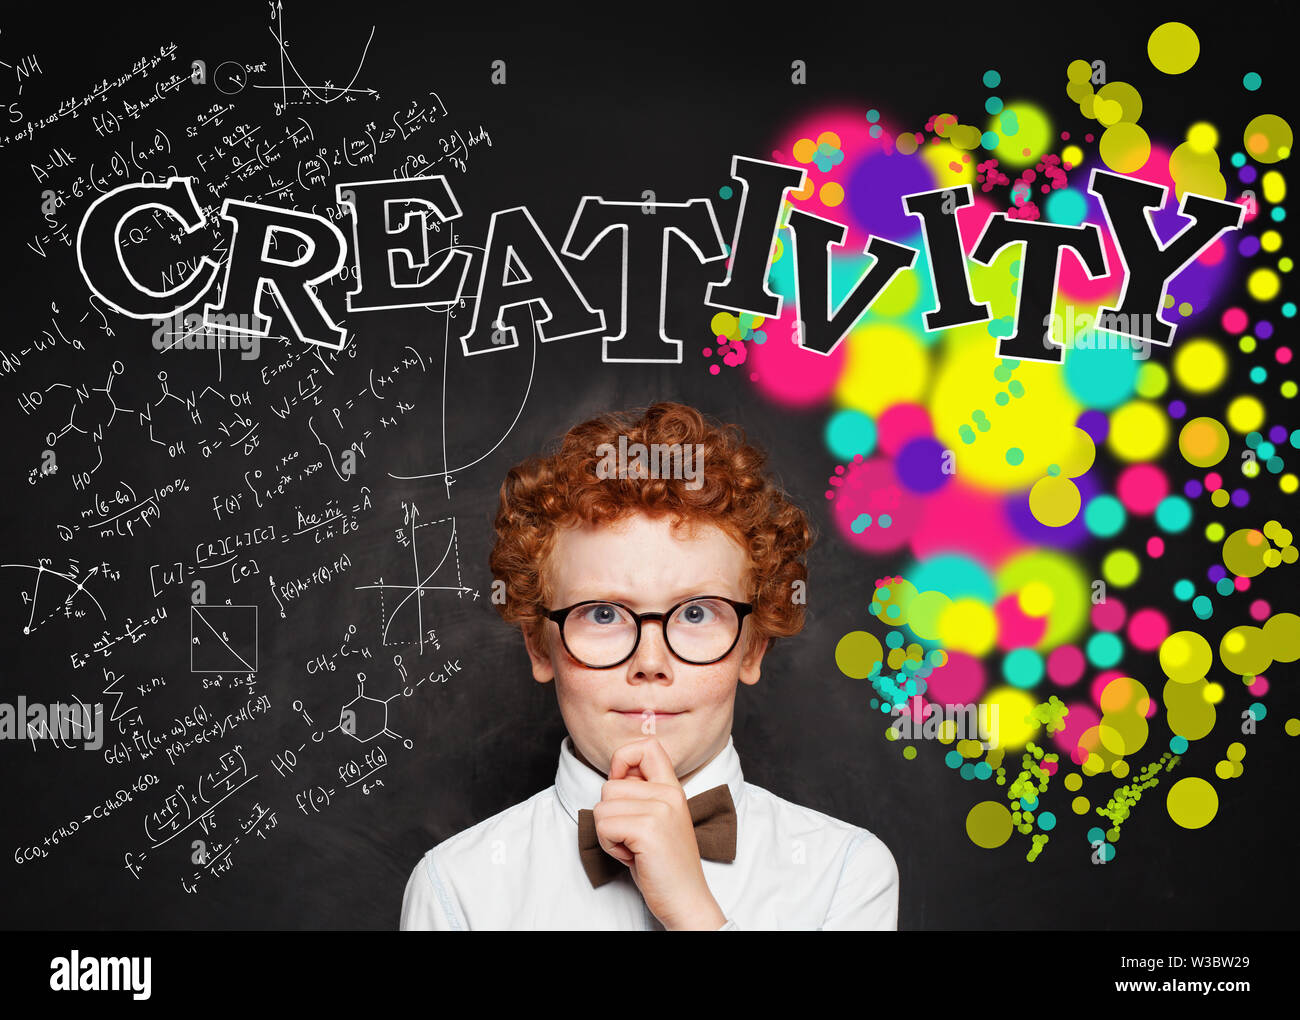 Smart child thinking. Creativity education and brainstorming concept Stock Photo